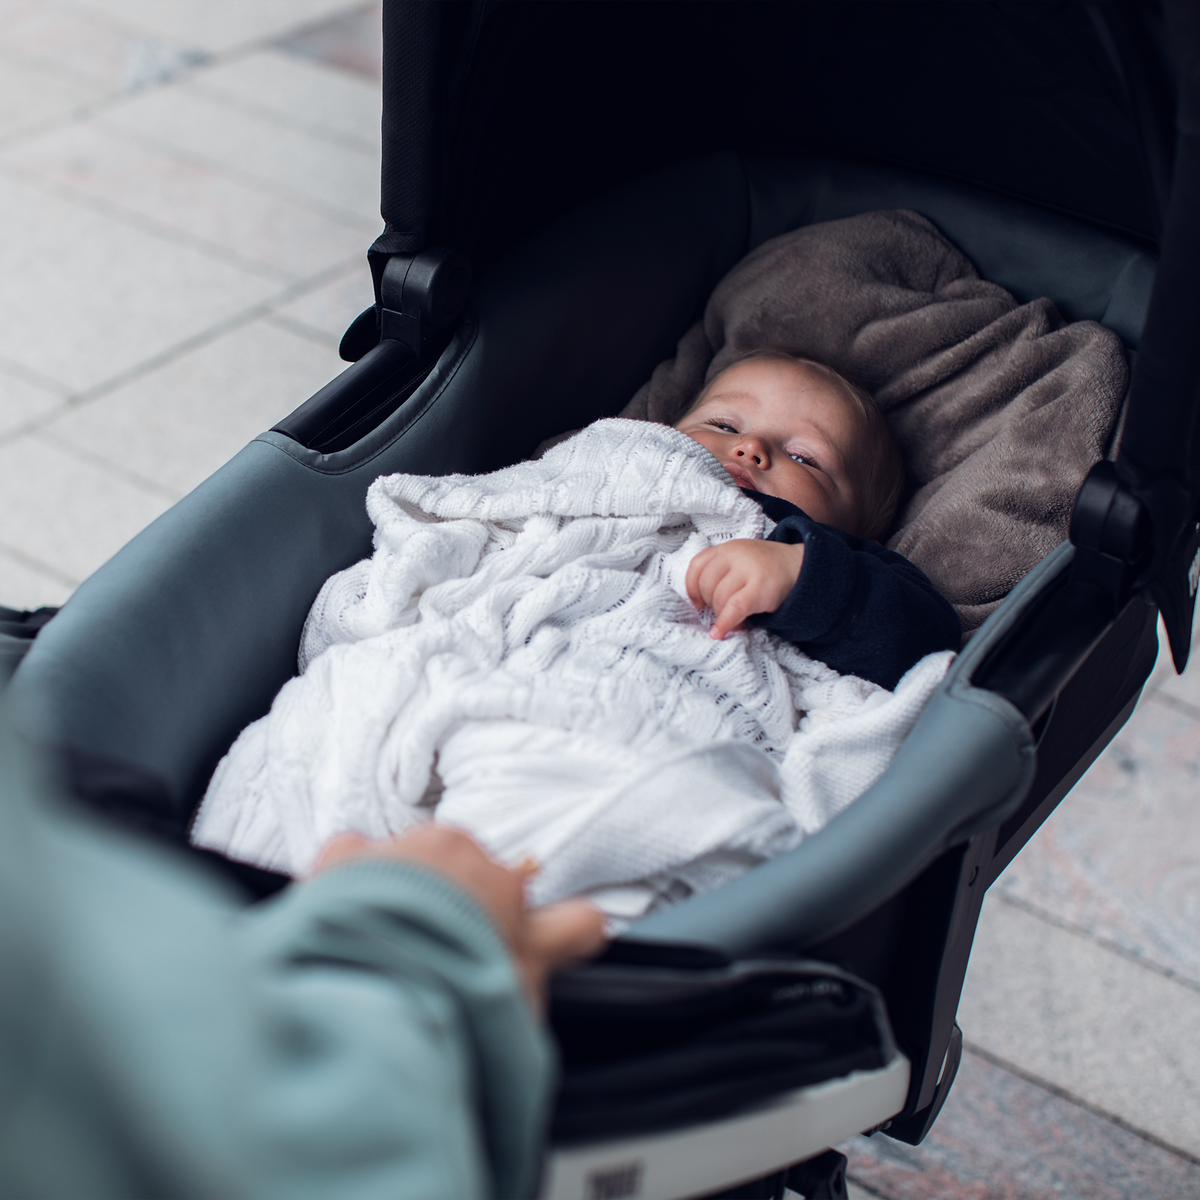 A close-up of a baby sleeping with a blanket inside a black Thule Urban Glide 2 baby bassinet.